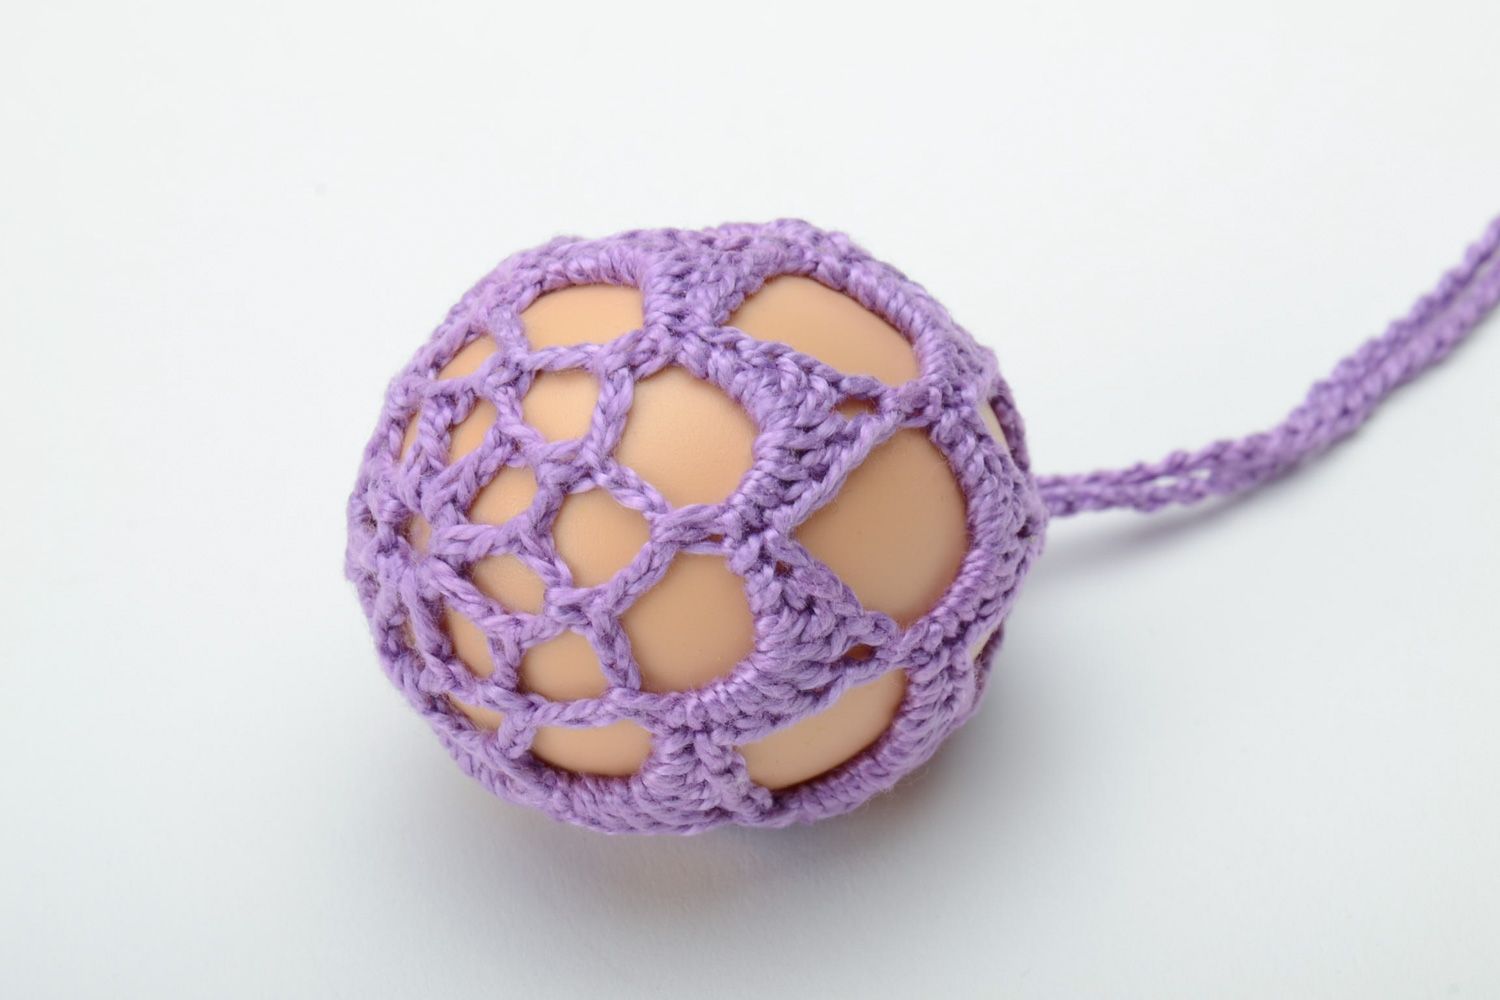 Homemade lilac interior pendant Easter egg woven over with threads photo 2